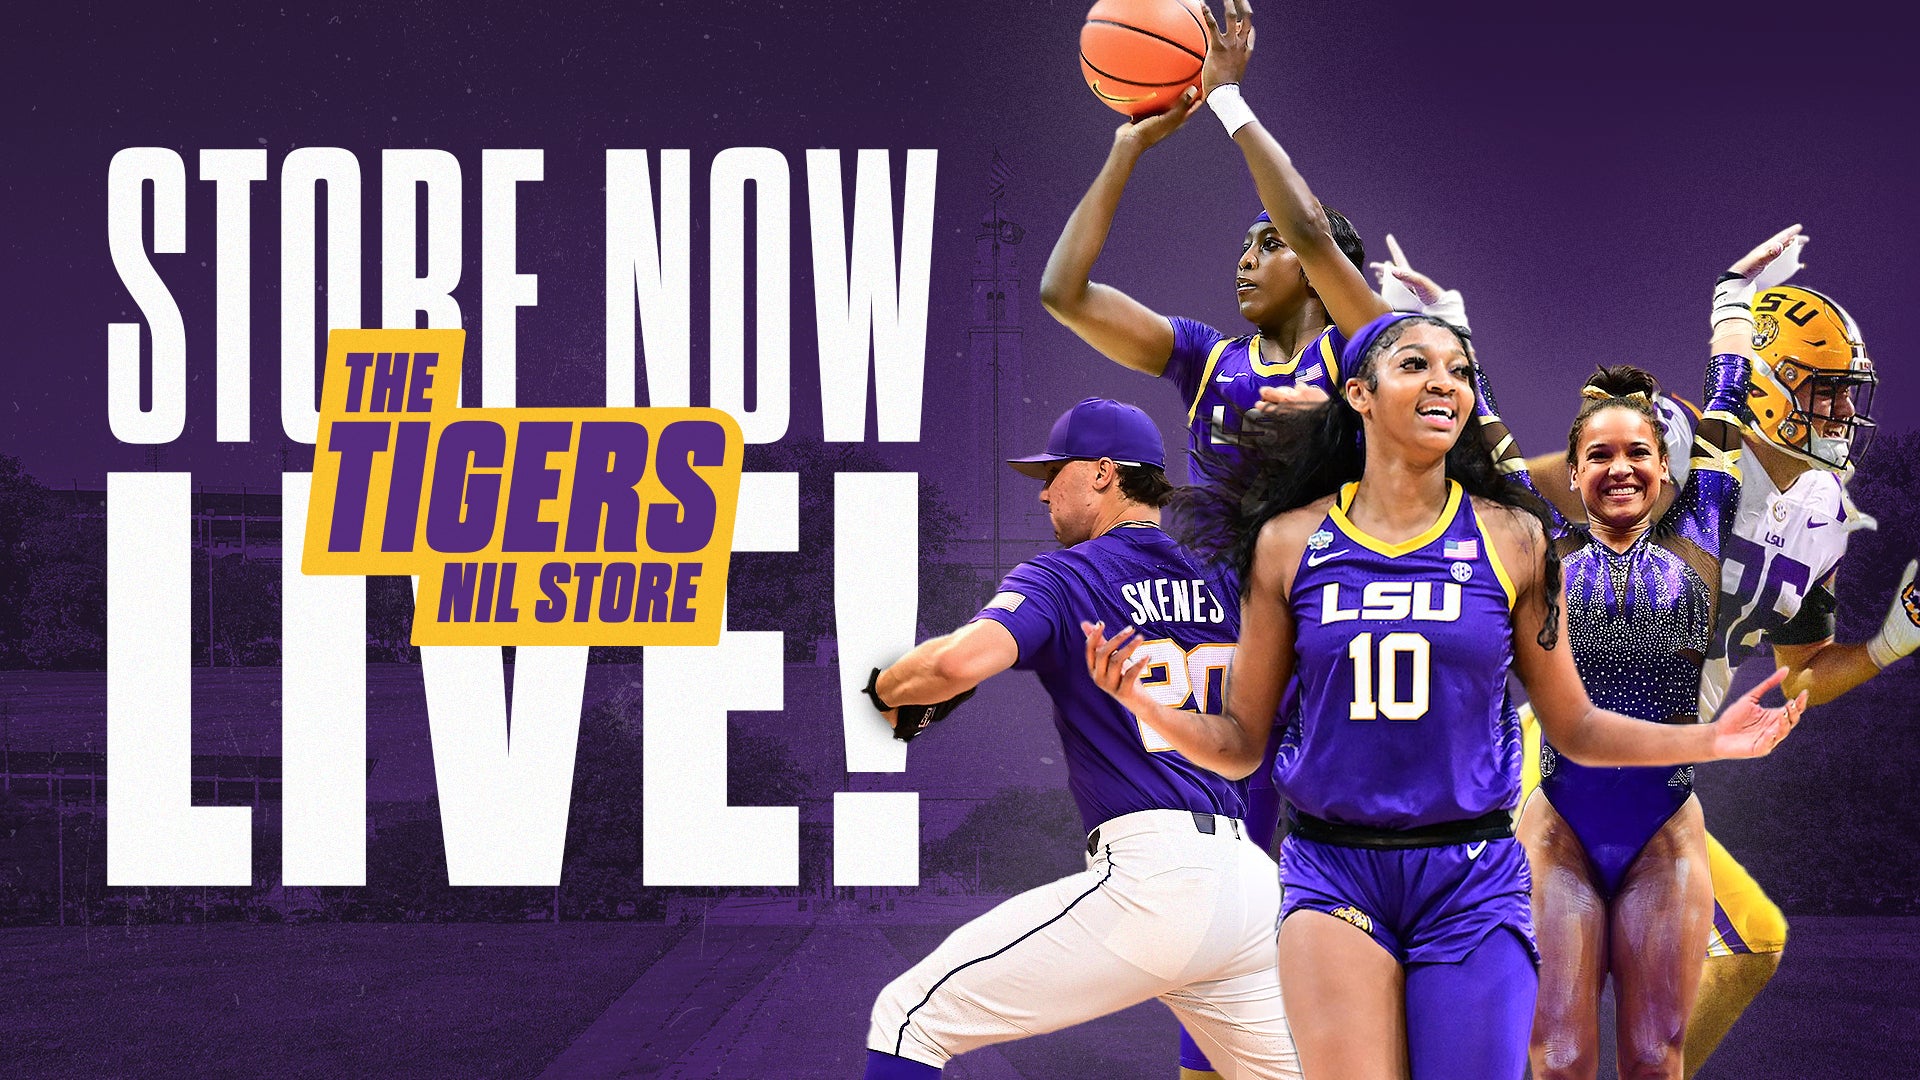 Tigers NIL Store Officially Opens for LSU Athletes Featuring Angel Ree